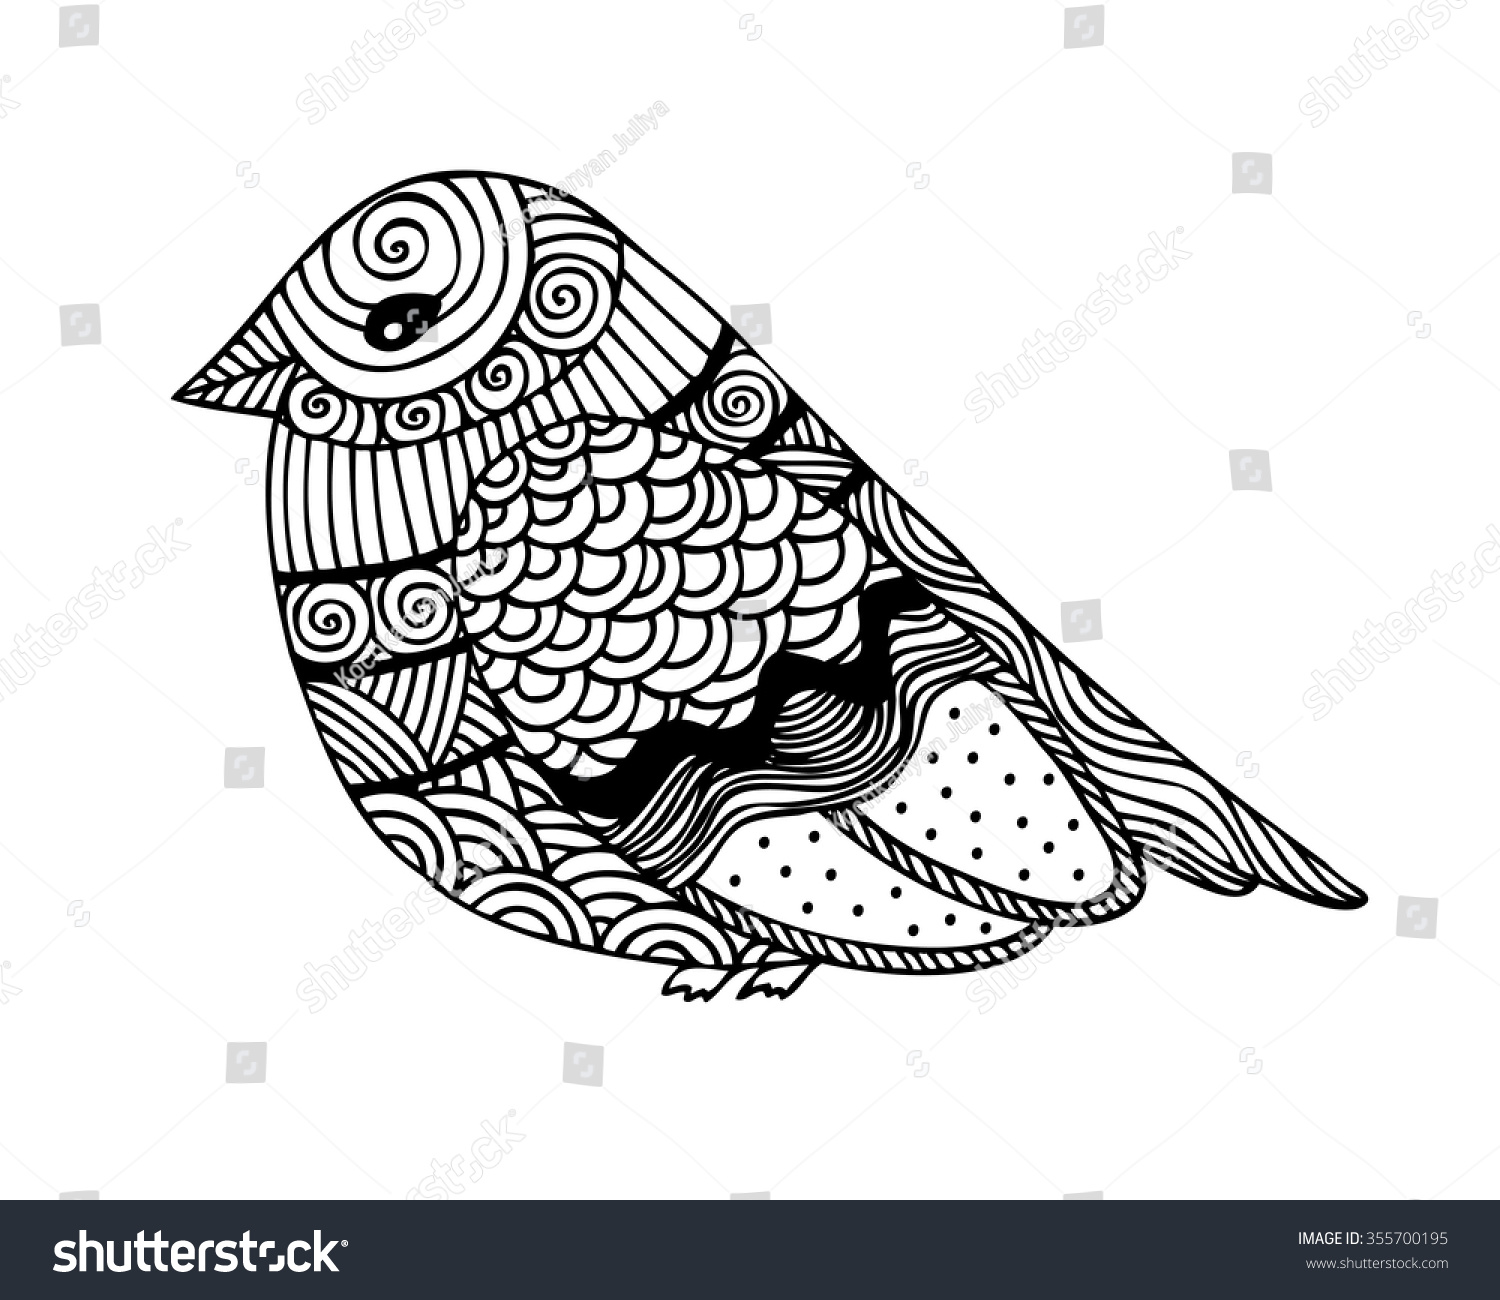 Adult Coloring Book Page Design With Fantastic Bird. Coloring Book Page ...